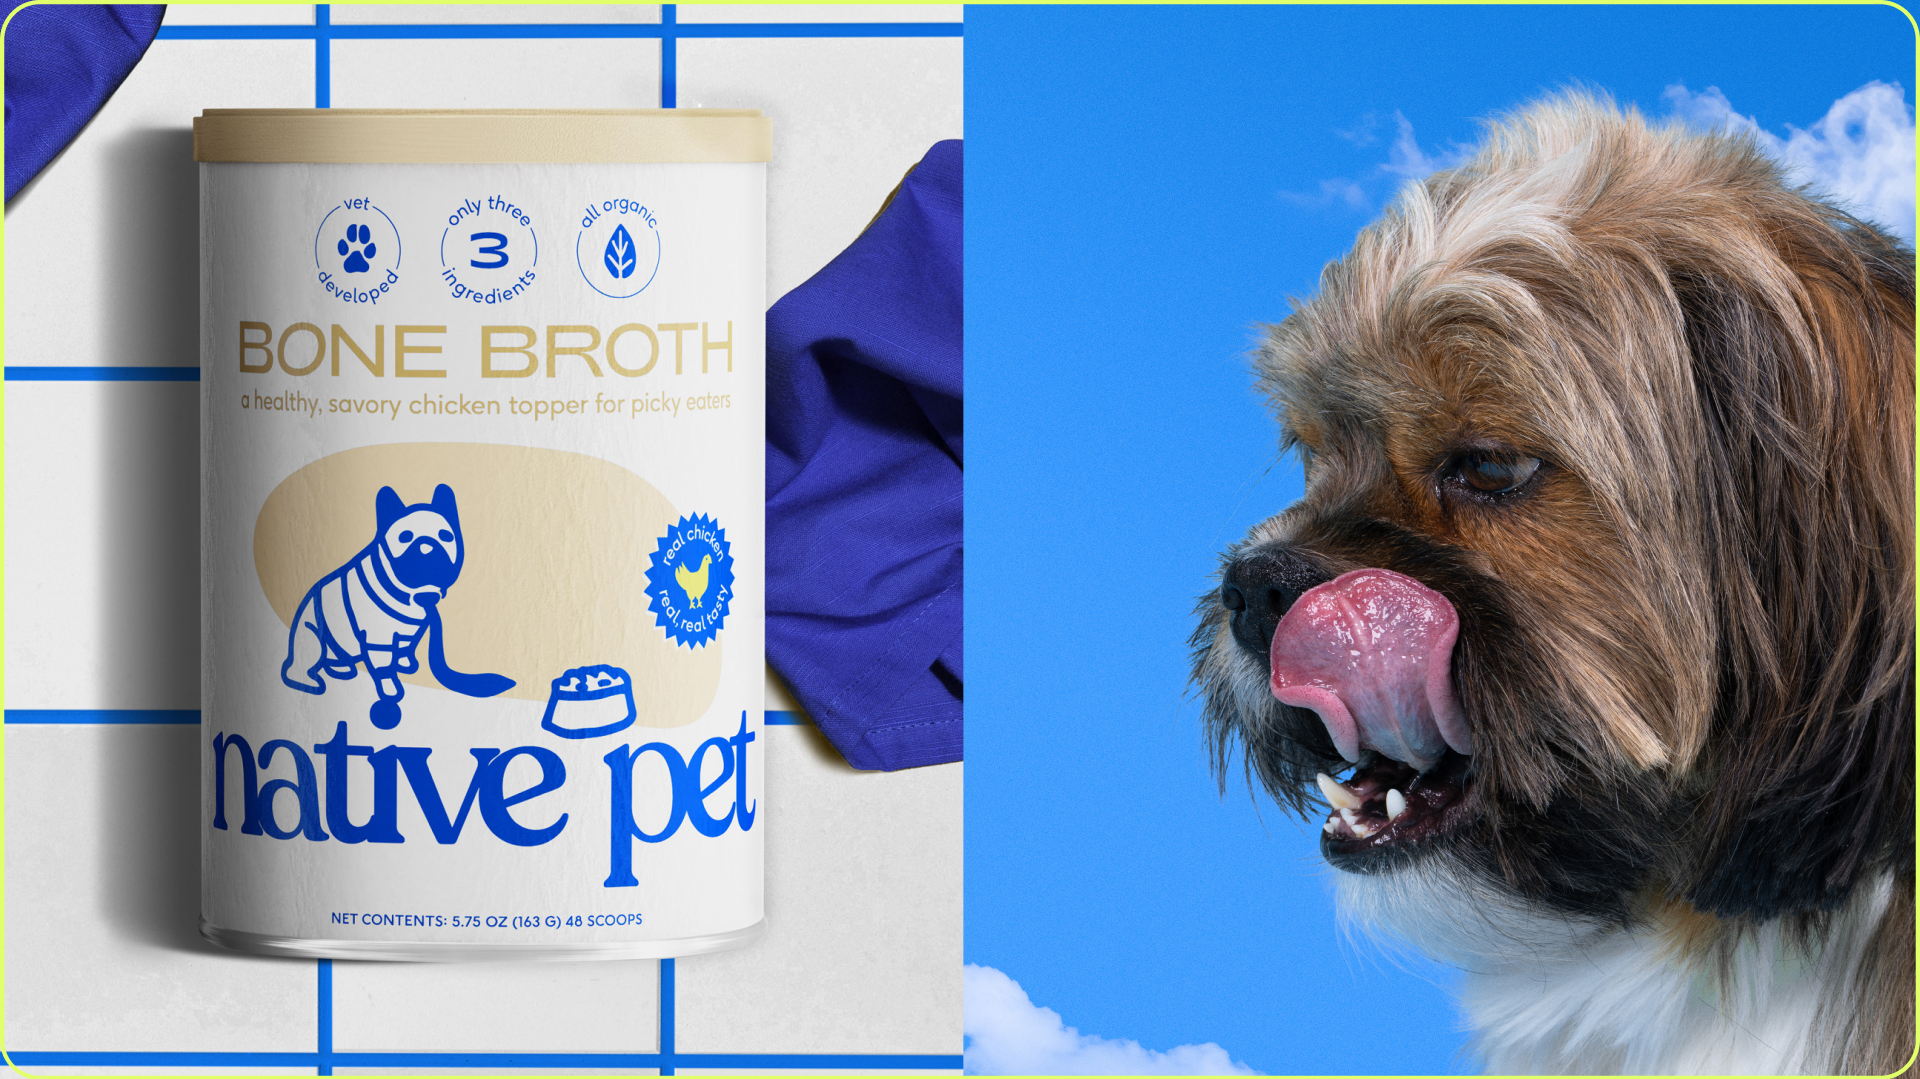 Tails Are Wagging For Native Pet’s New Packaging Refresh From CAVU